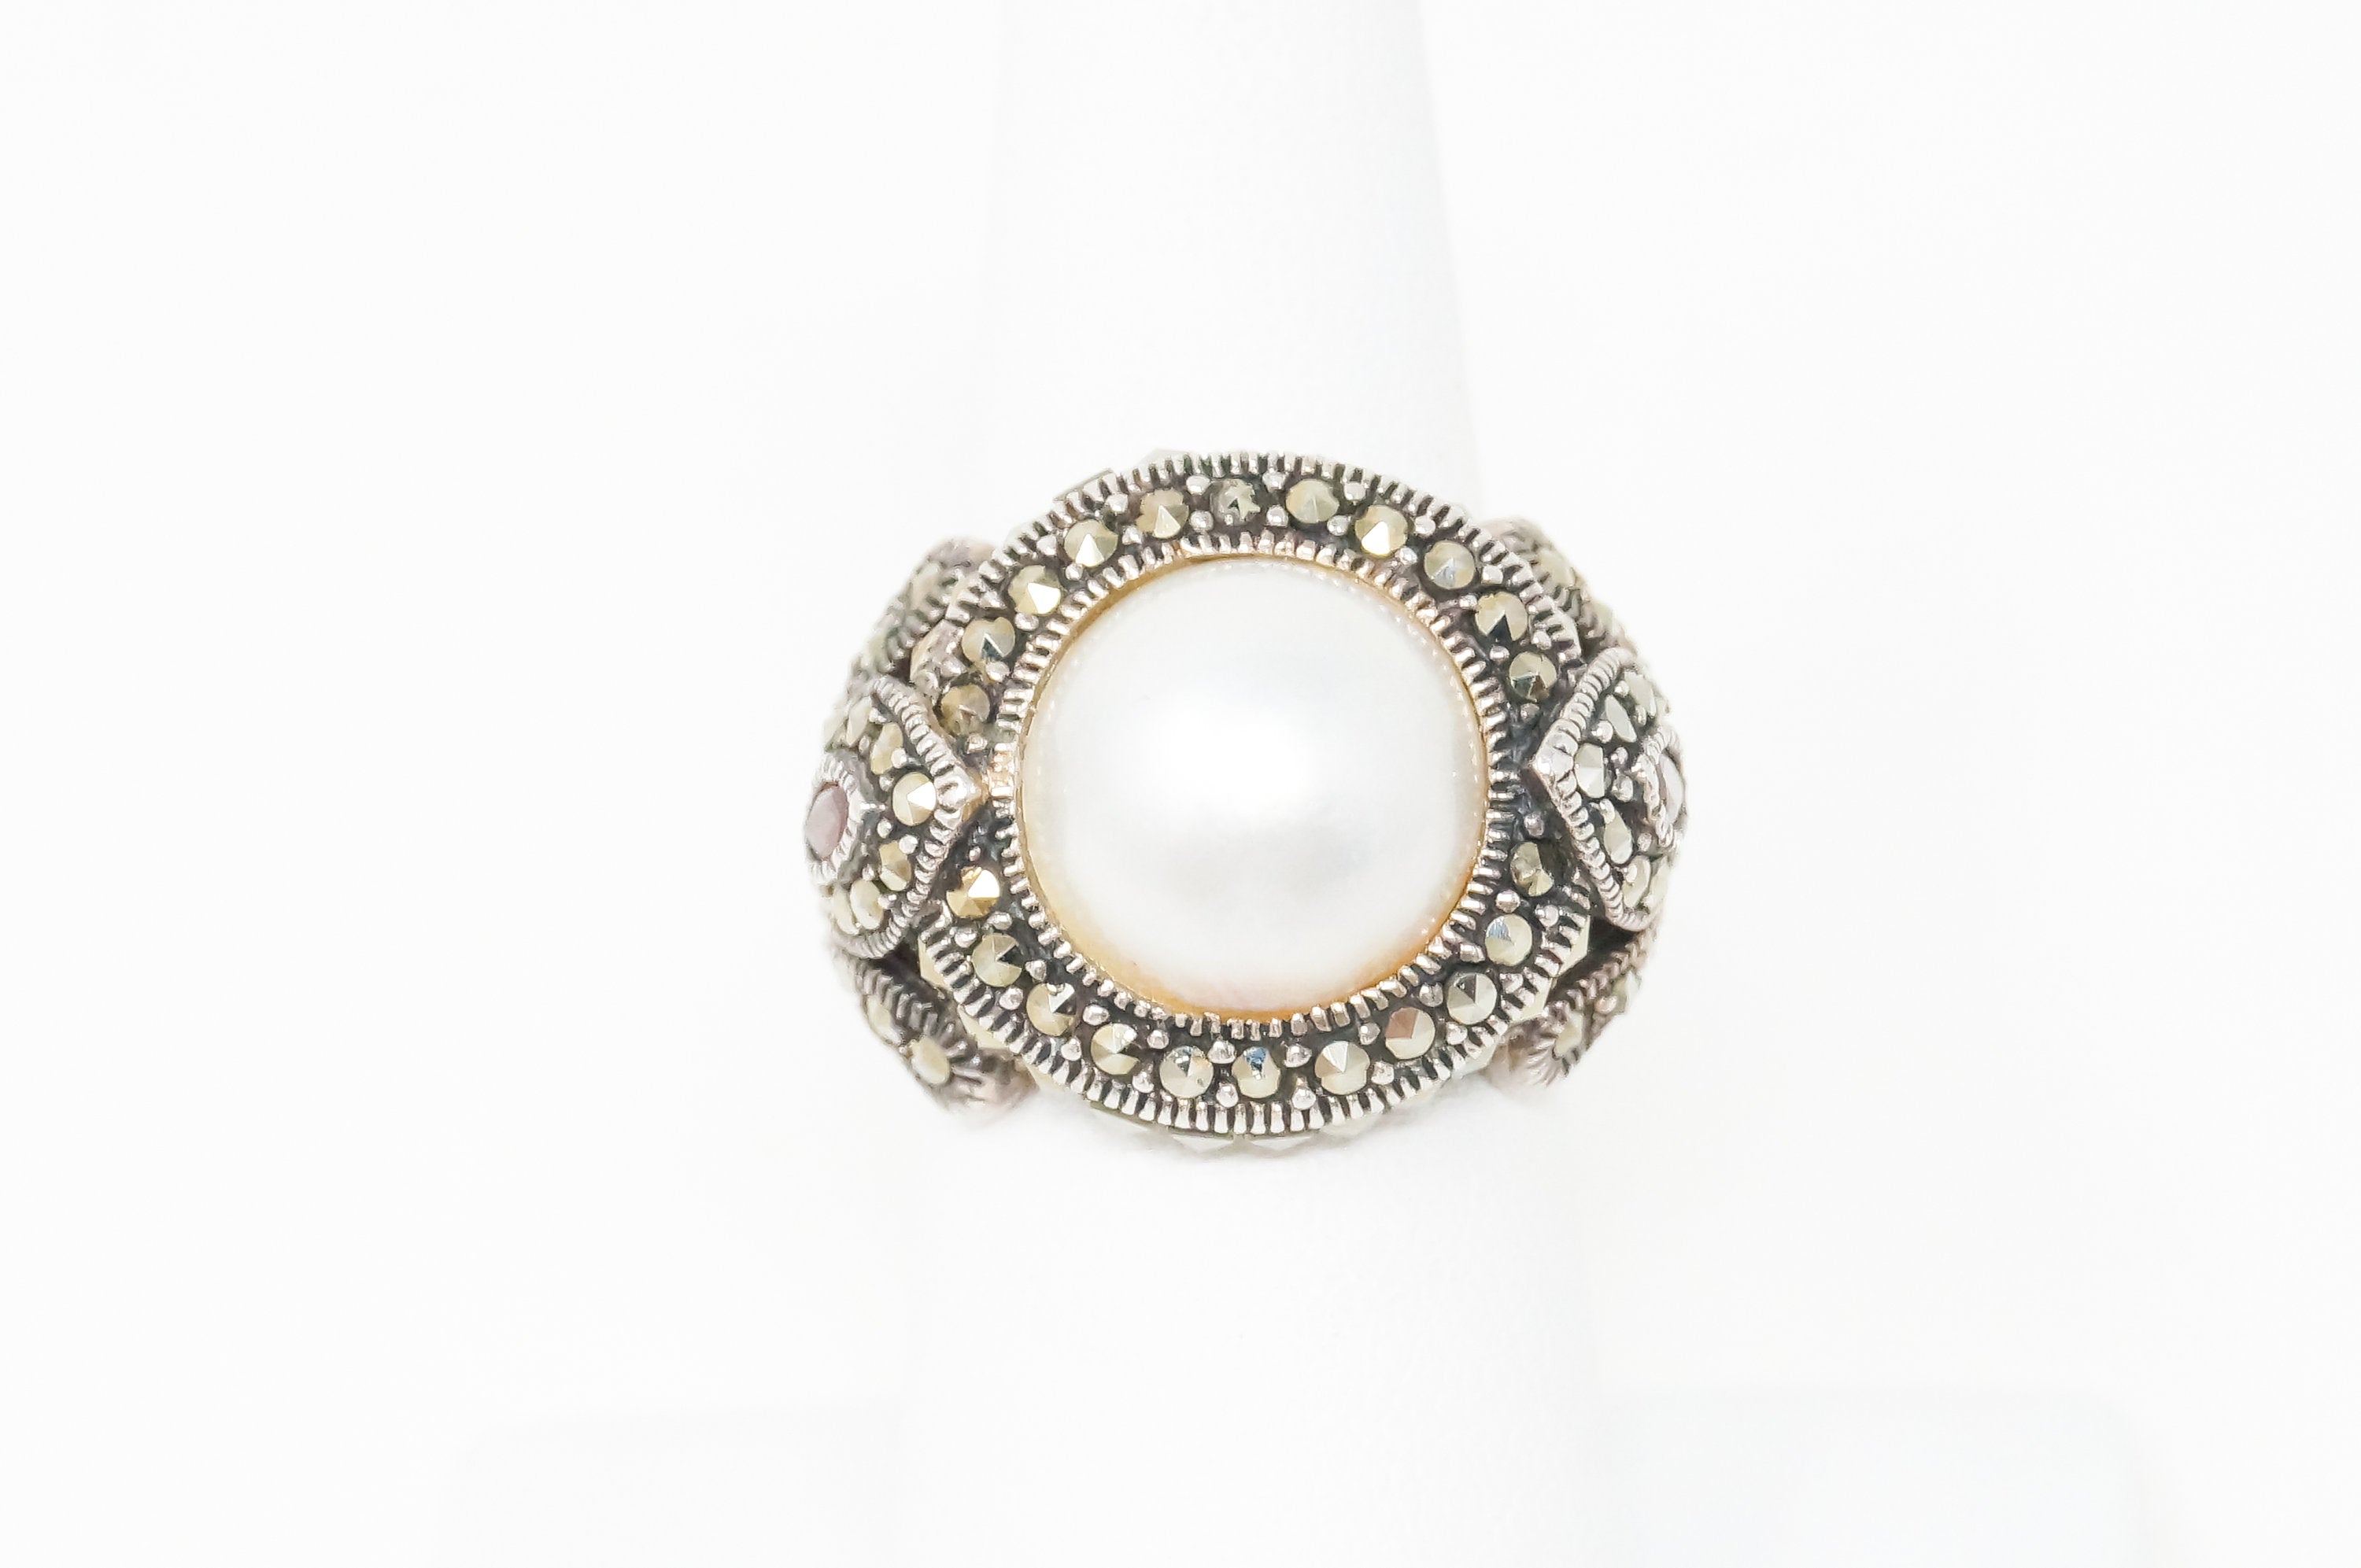 Vintage Pearl Marcasite Art Deco Style Ring Sterling Silver Sz 6.75